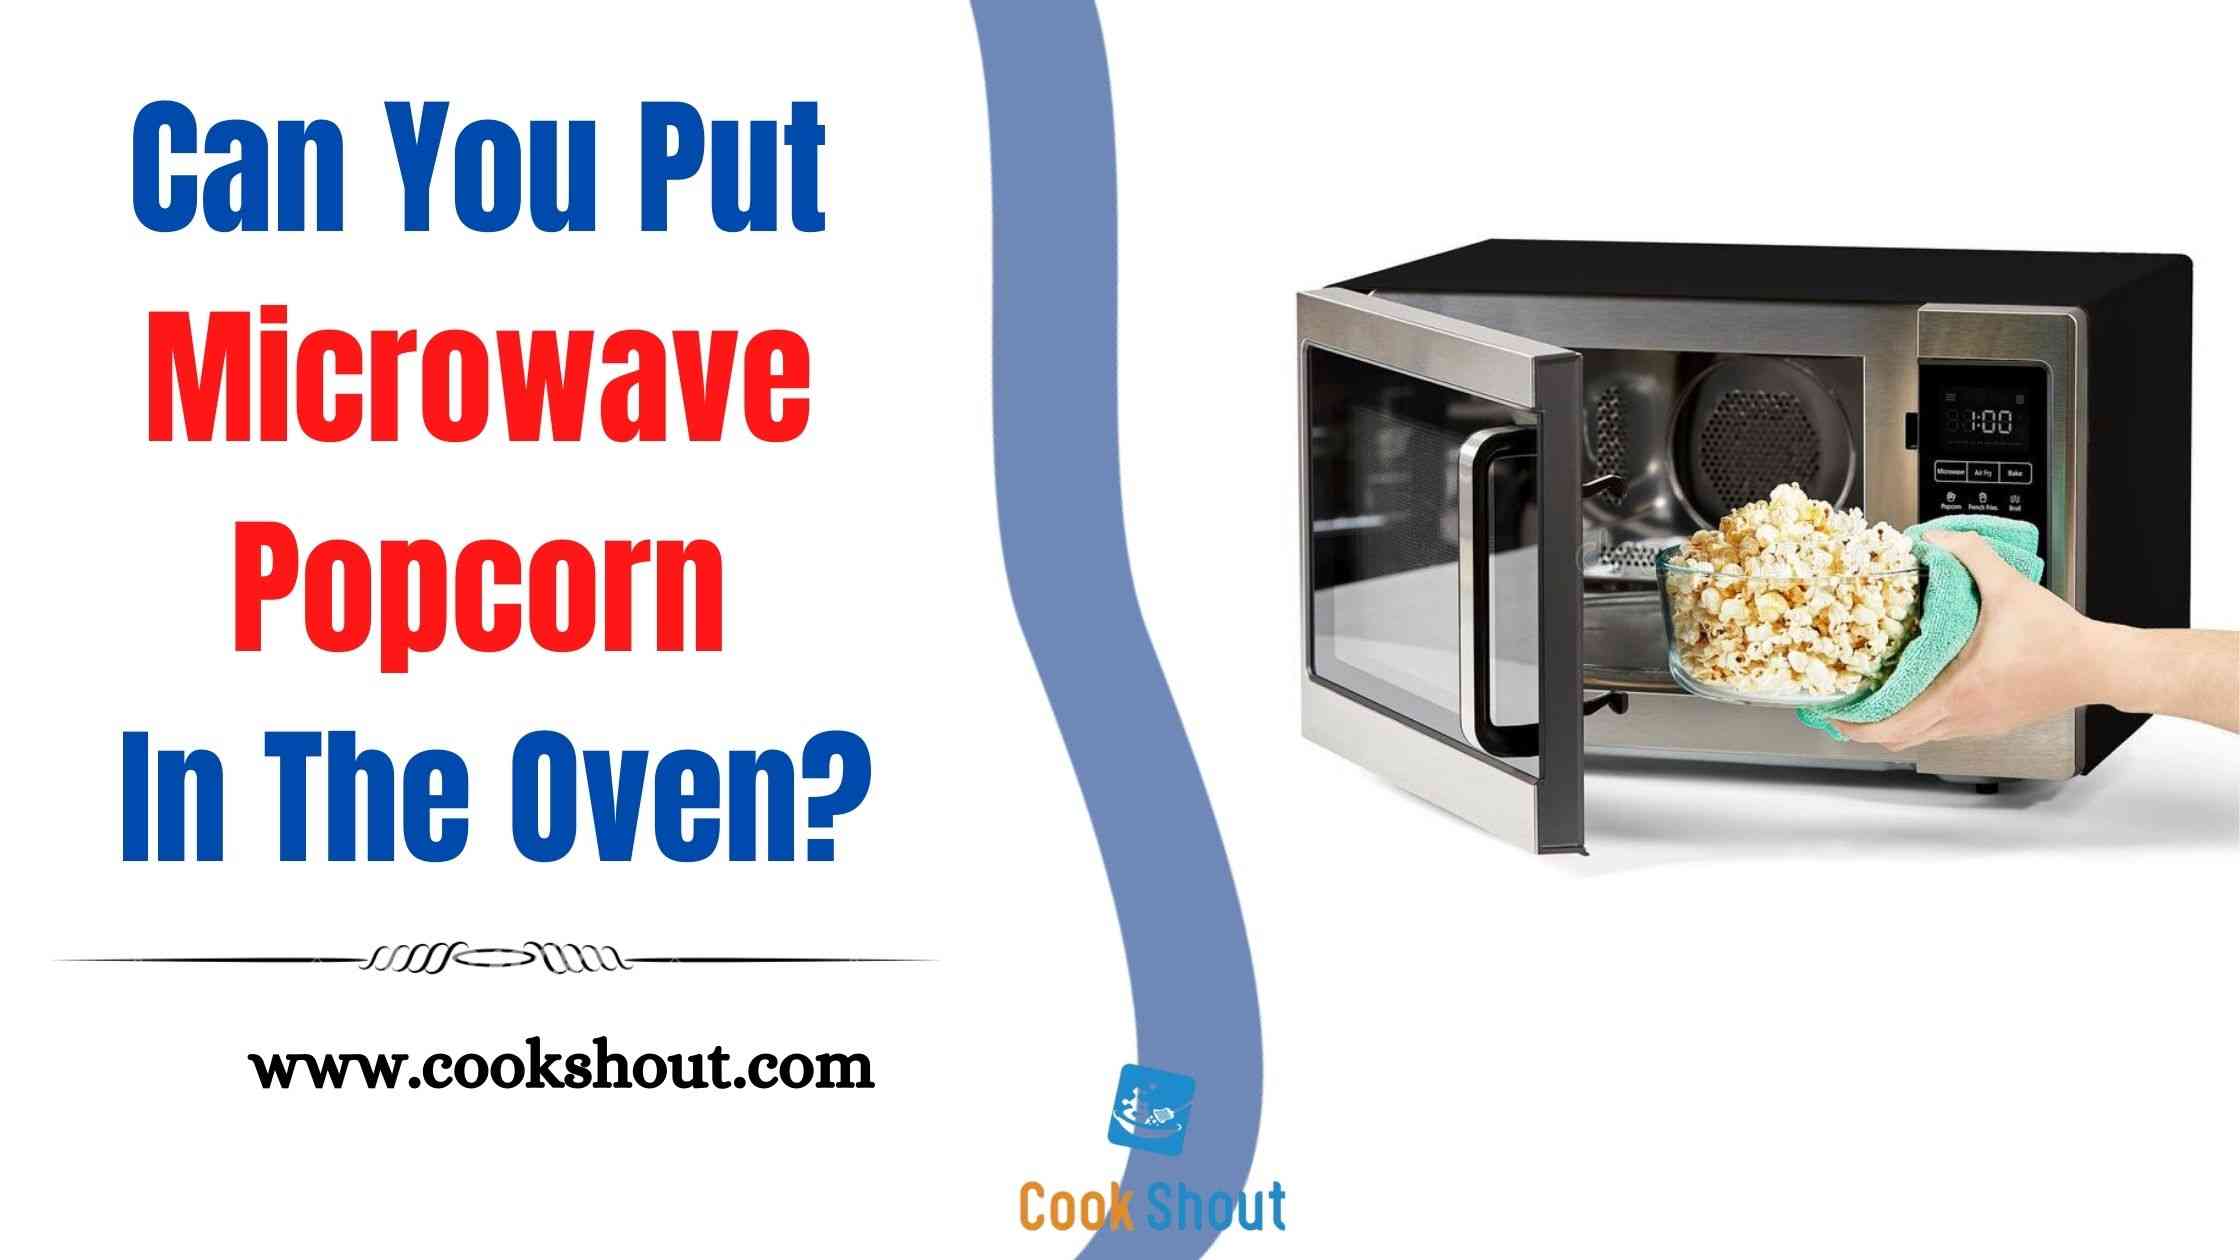 Can You Put Microwave Popcorn In The Oven?